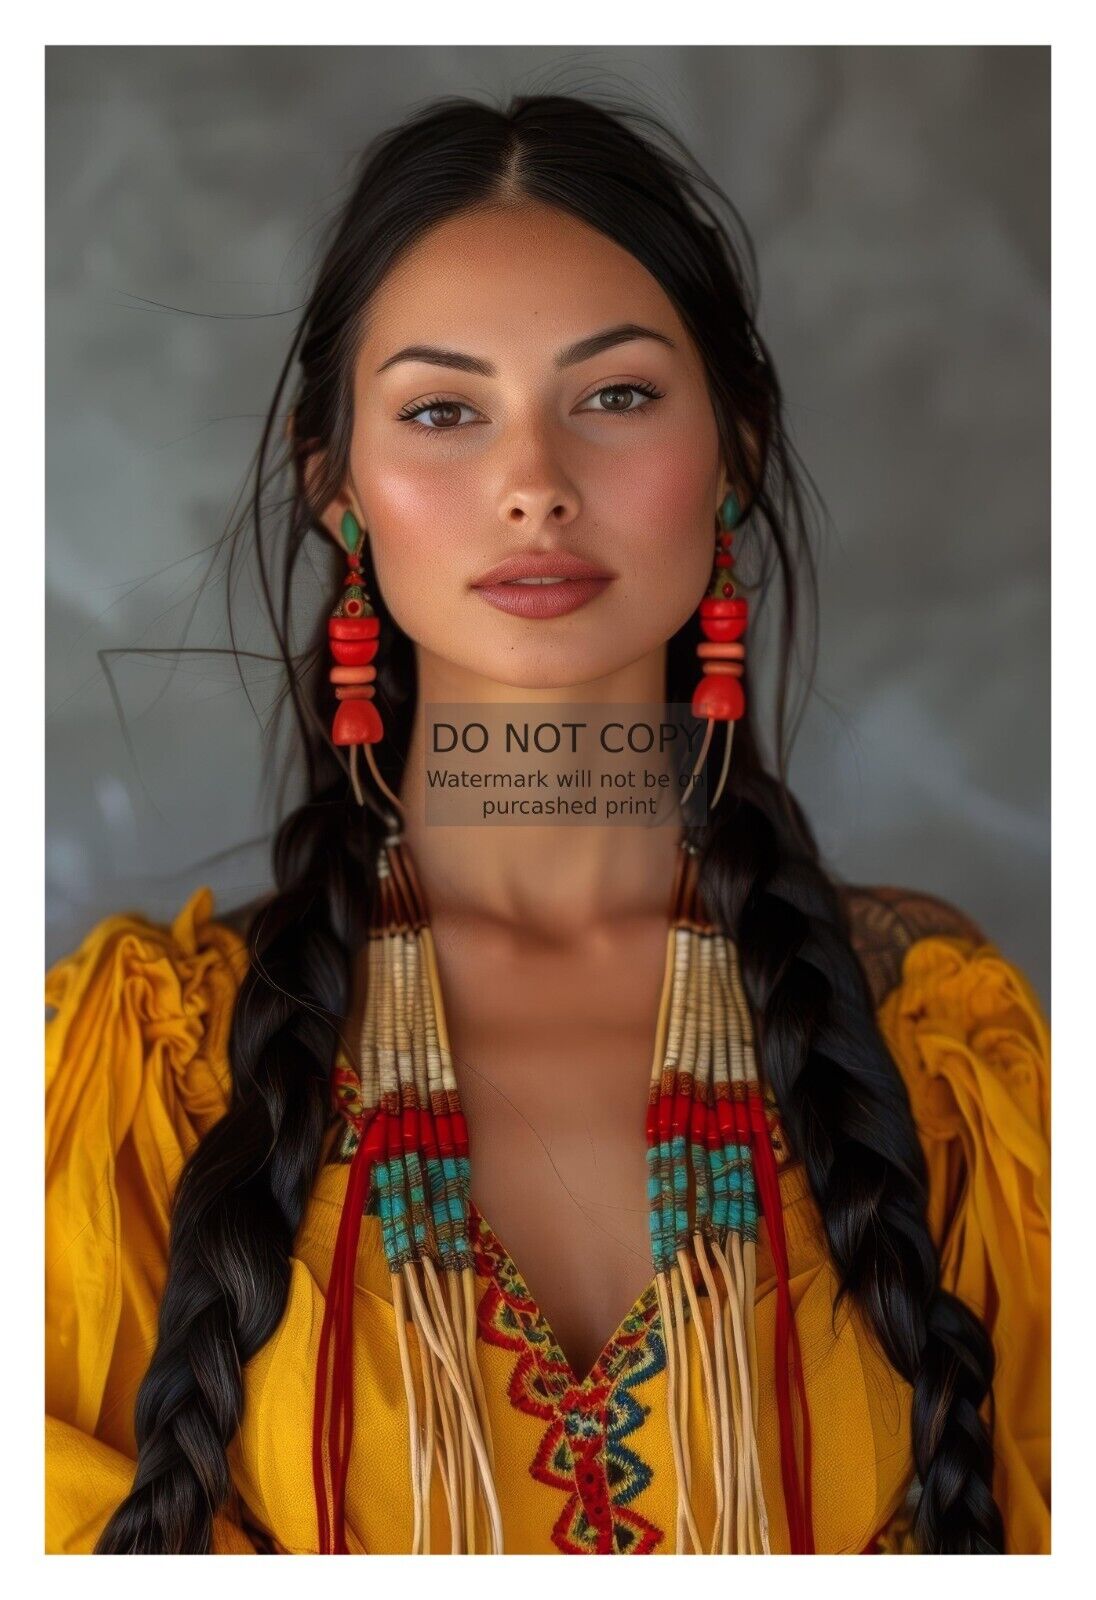 GORGEOUS YOUNG NATIVE AMERICAN LADY BEADS 4X6 FANTASY PHOTO